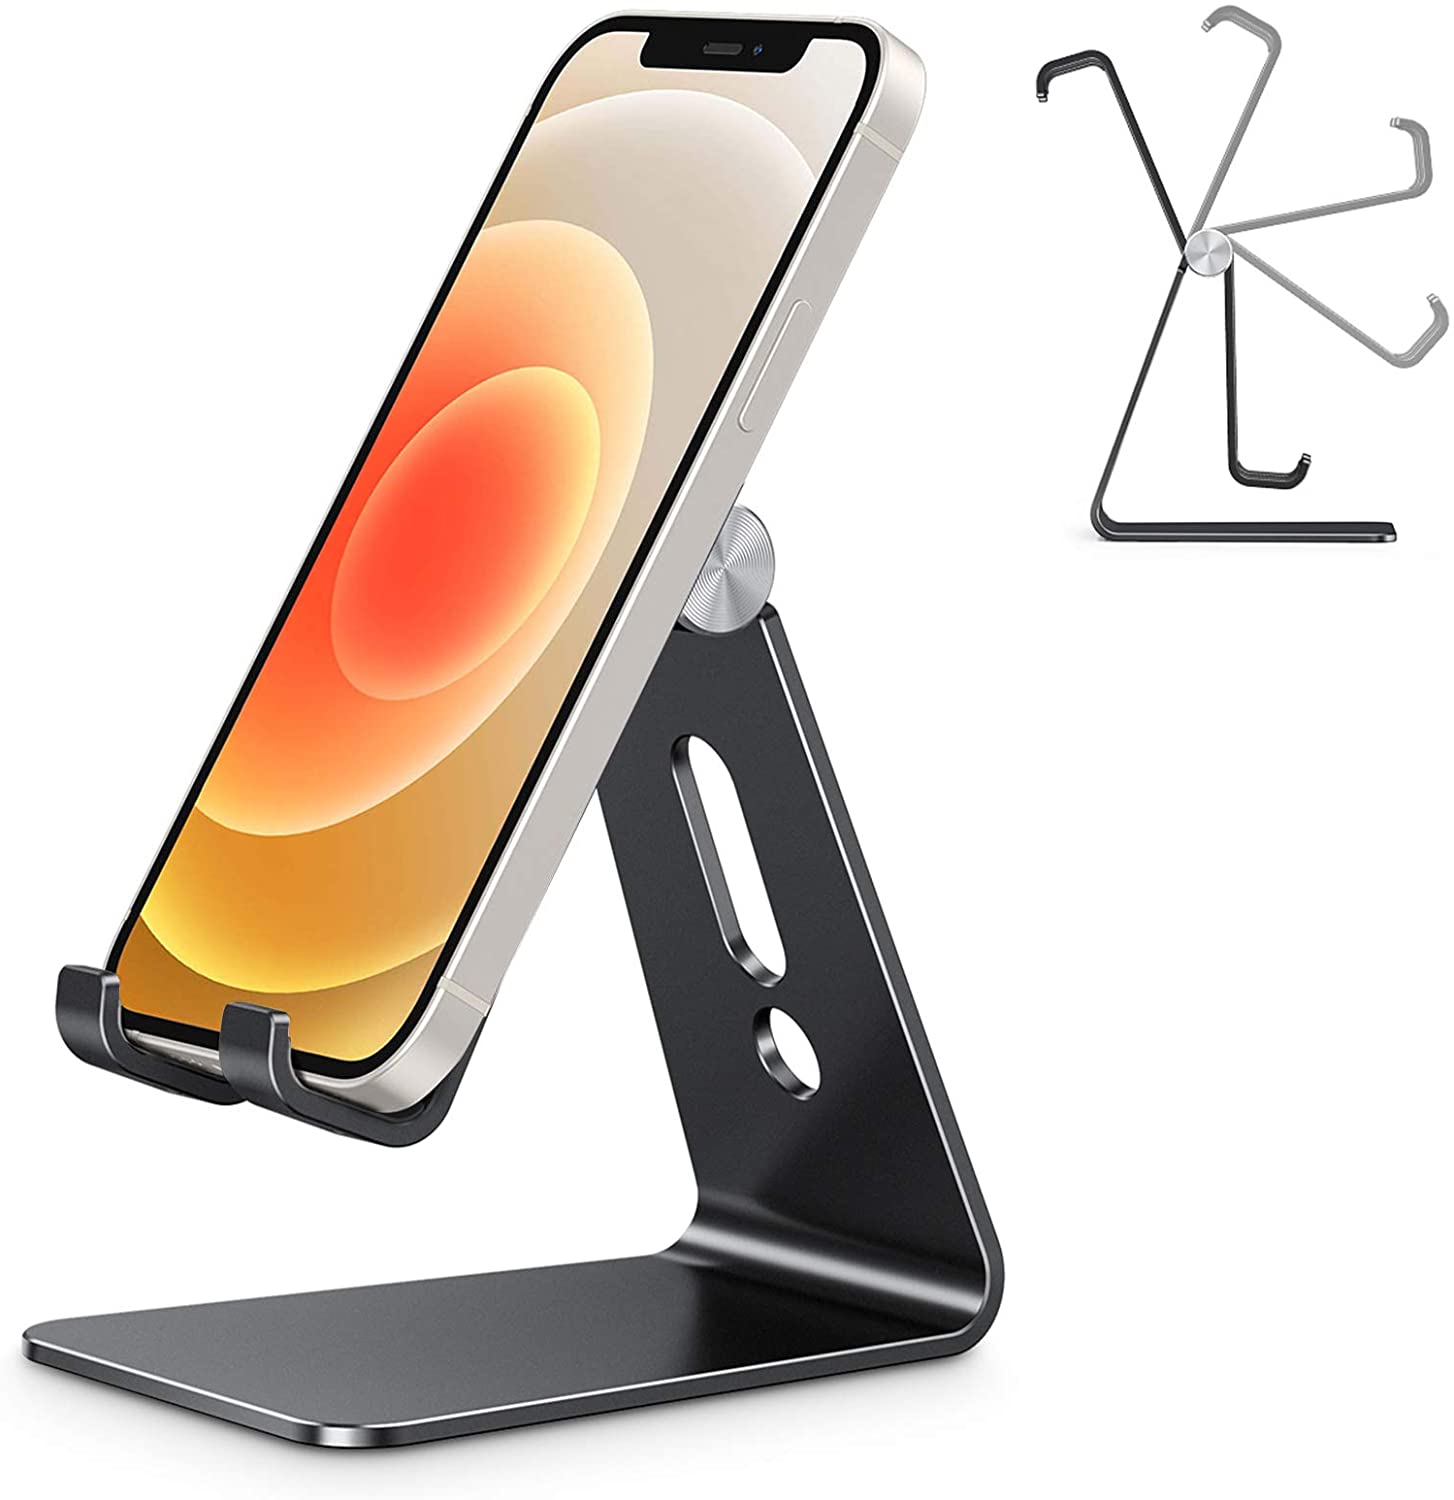 Portable Stand Holder for iPad Tablet Black OMOTON Aluminum Desktop Tablet Cellphone Stand with Anti-Slip Base Adjustable Tablet Cellphone Stand 